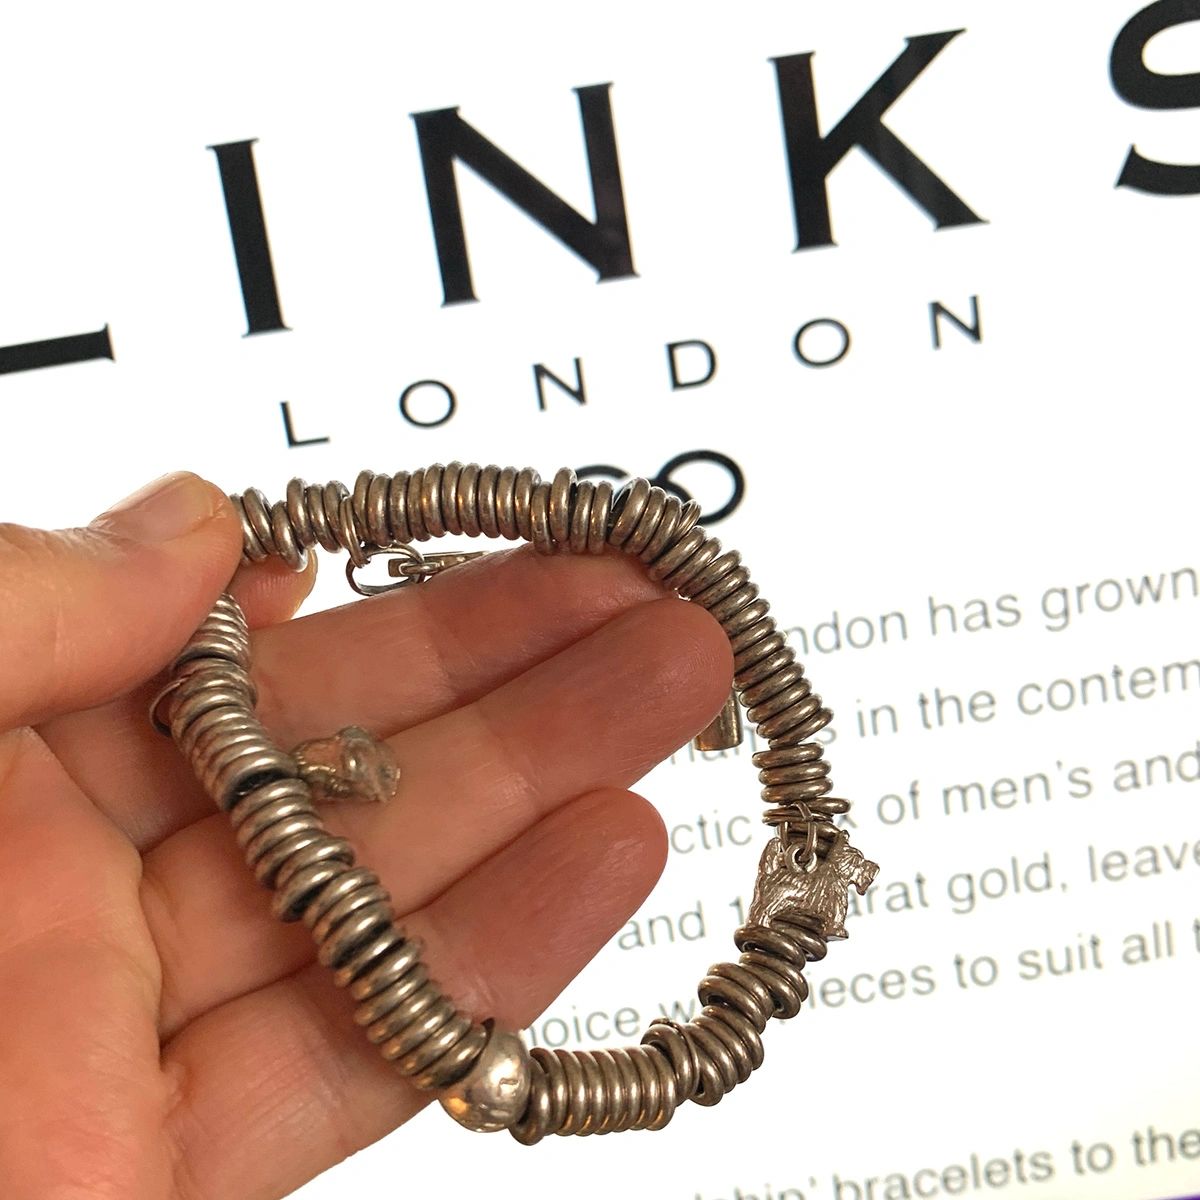 What Ever Happened to the Popular Links of London Bracelet